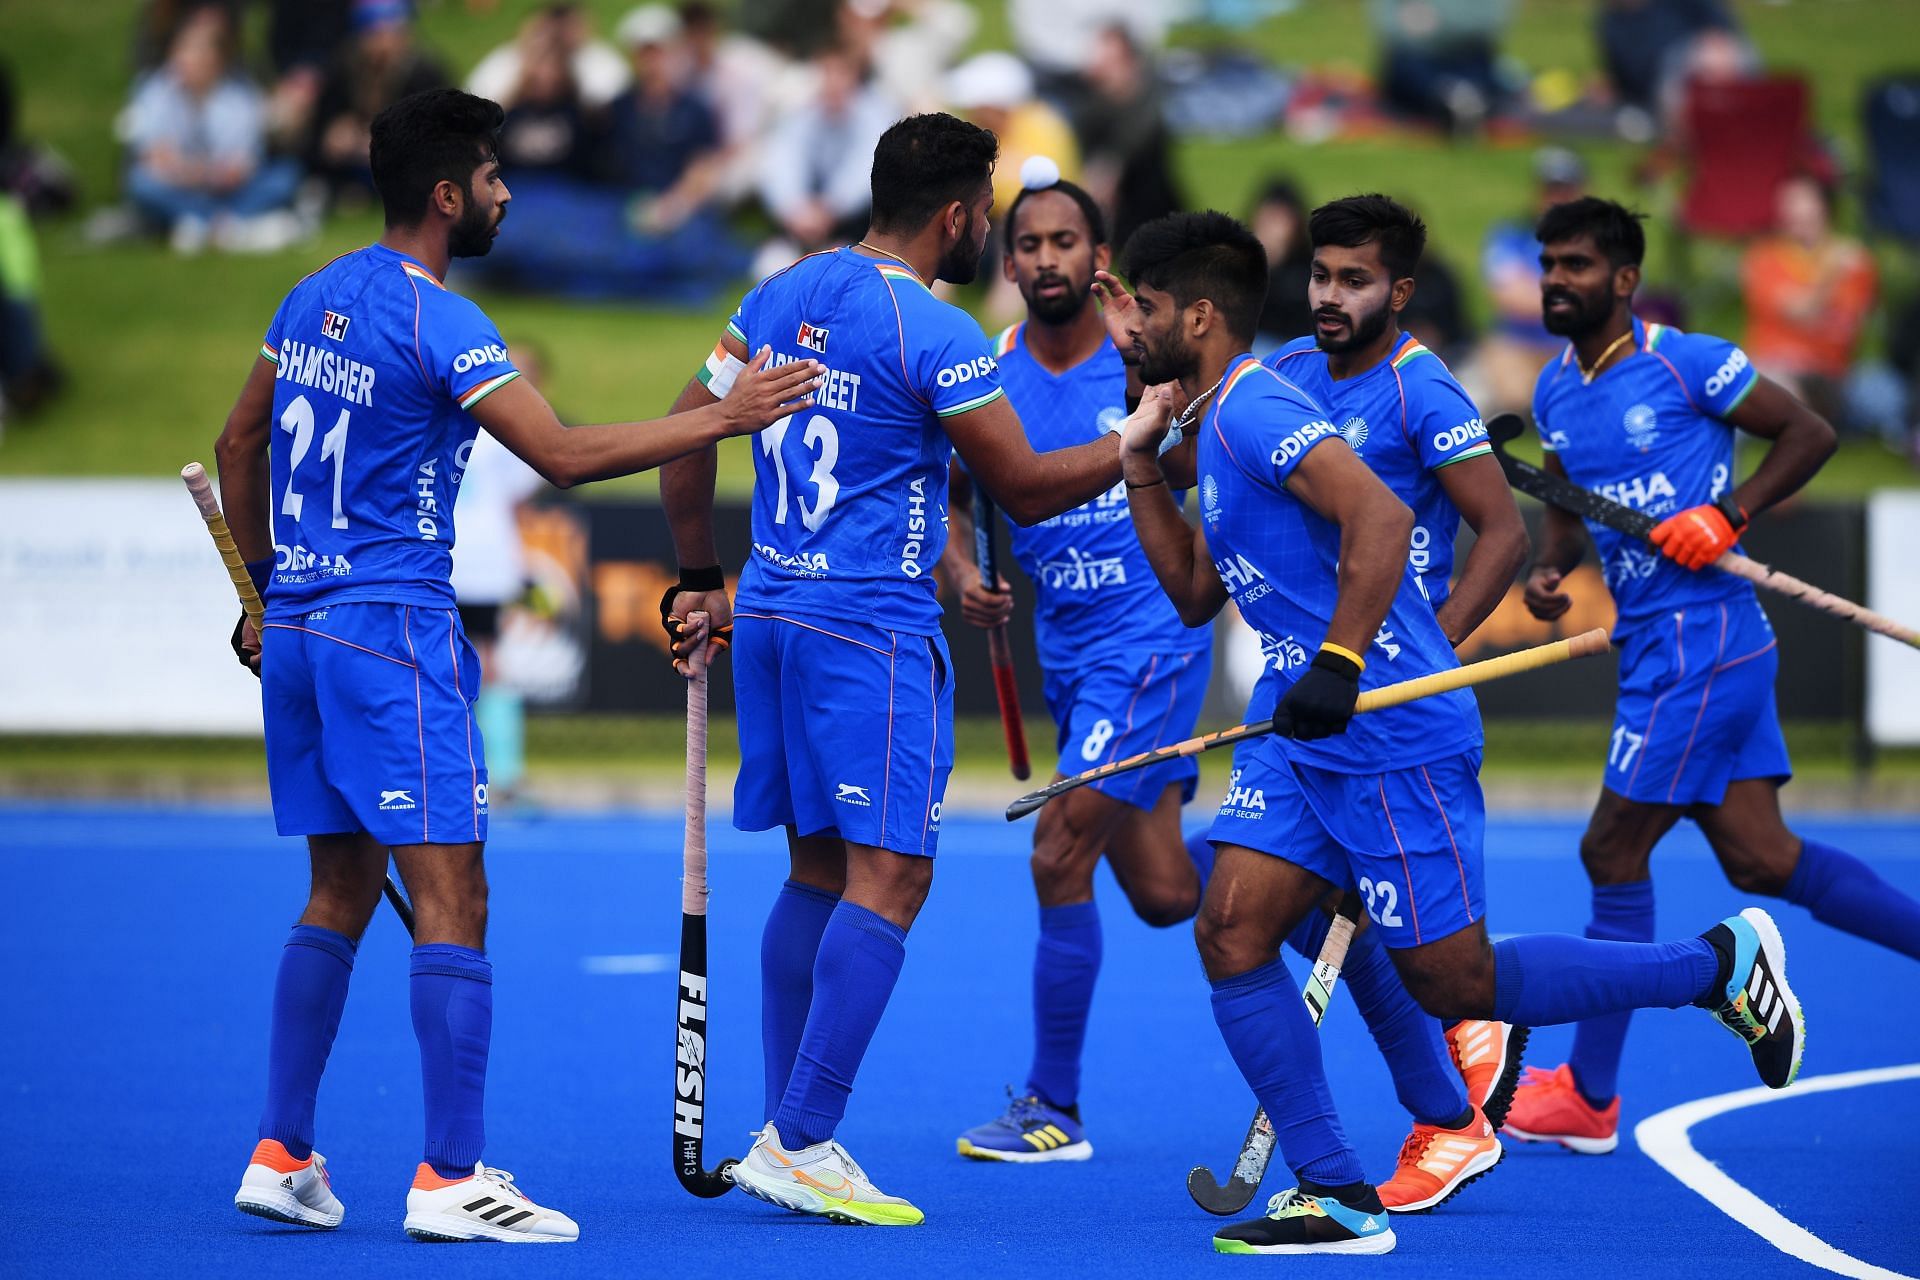 Harmnapreet Singh has grown to become one of the best drag flickers in world hockey